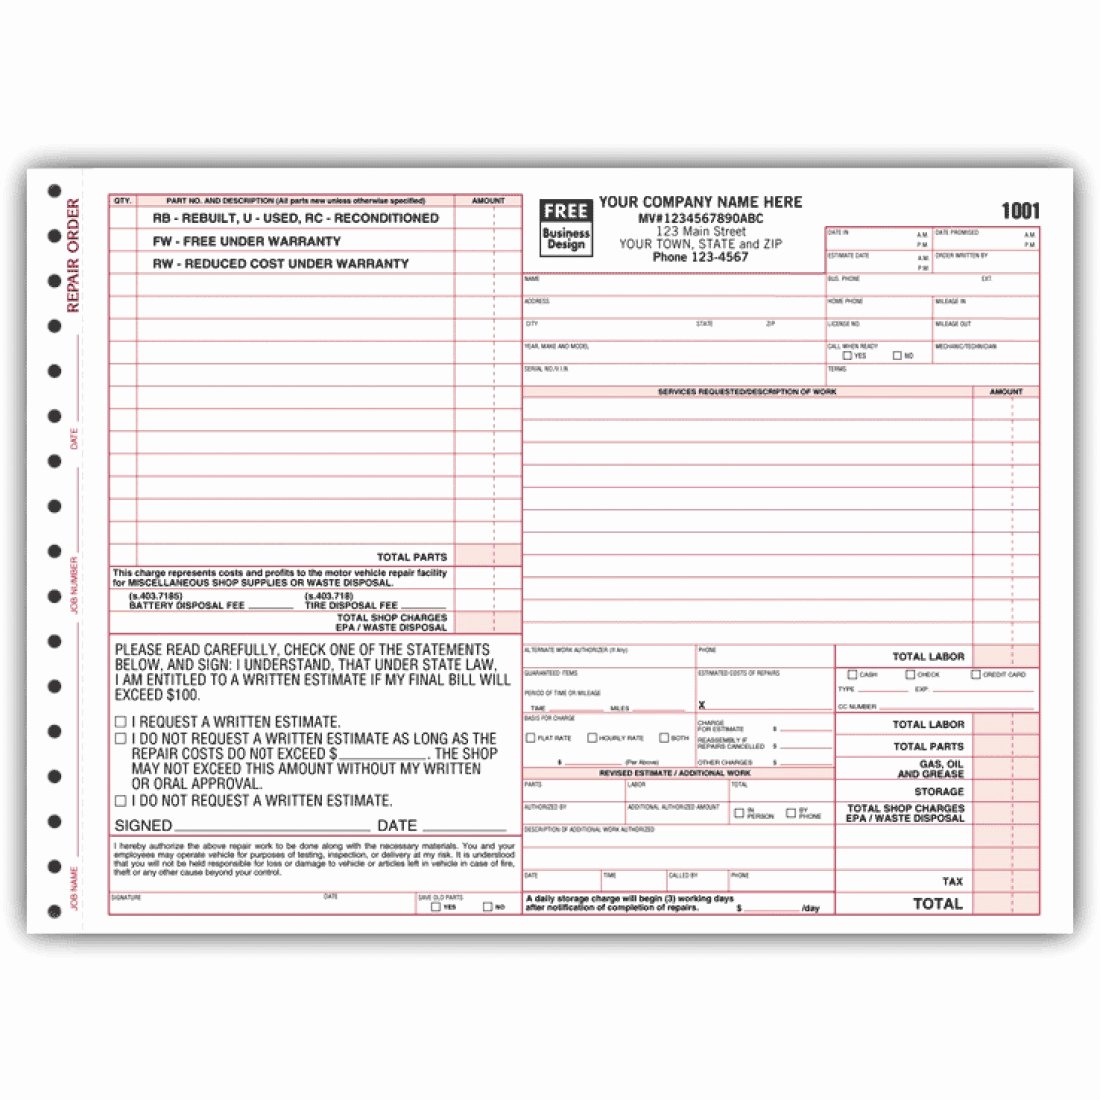 Auto Repair form Template Lovely Auto Repair order form Florida State Item No 6585